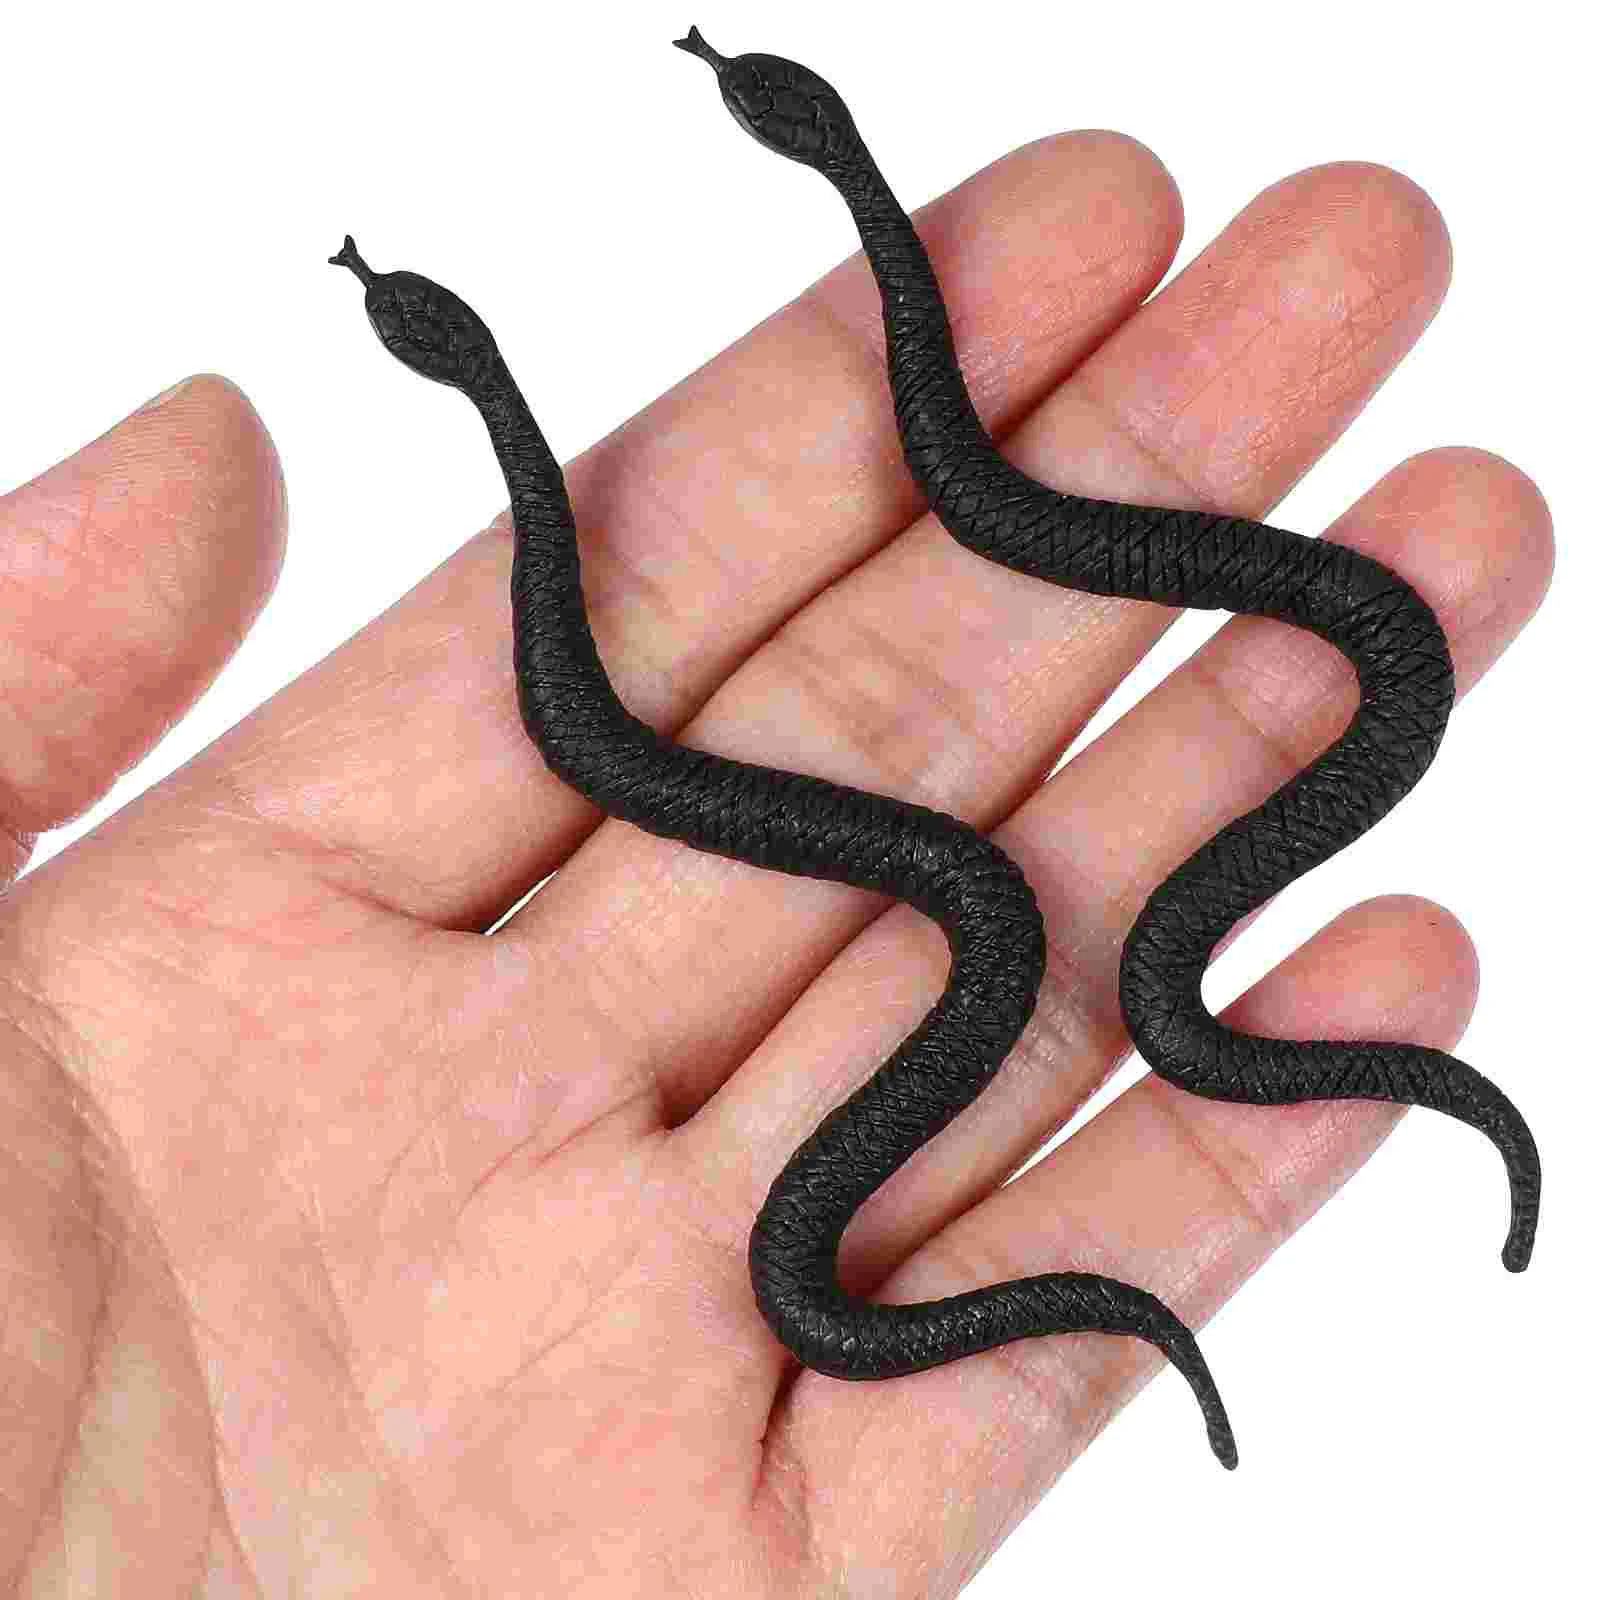 halloween fake snake model realistic rubber snakes pranks toy high simulation snake model tricky toys novelty 100 Pcs Simulation Snake Model Childrens Toys Faux Snakes Props Fake for Party Plastic Trick Realistic